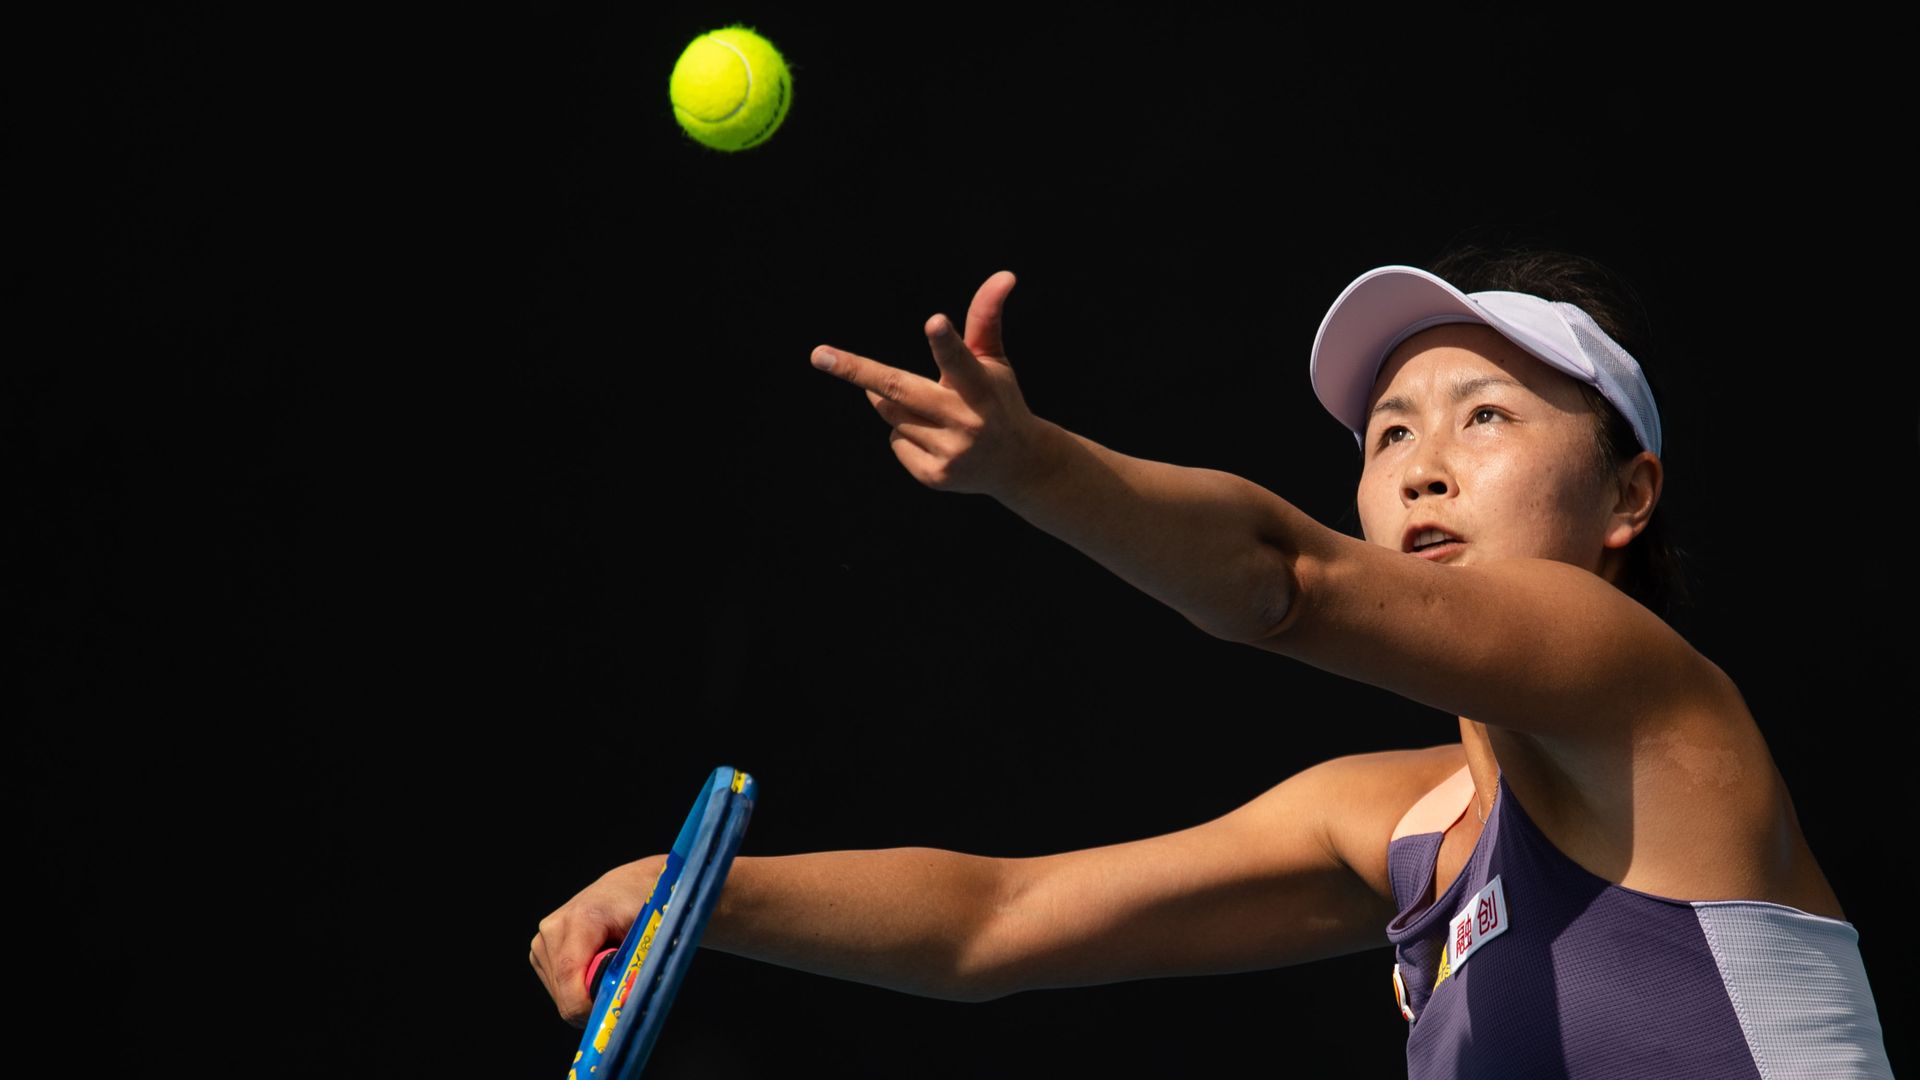 Peng Shuai of China serves to Hibino Nao of Japan during their women's singles first round match at the Australian Open tennis championship in Melbourne, Australia on Jan. 21